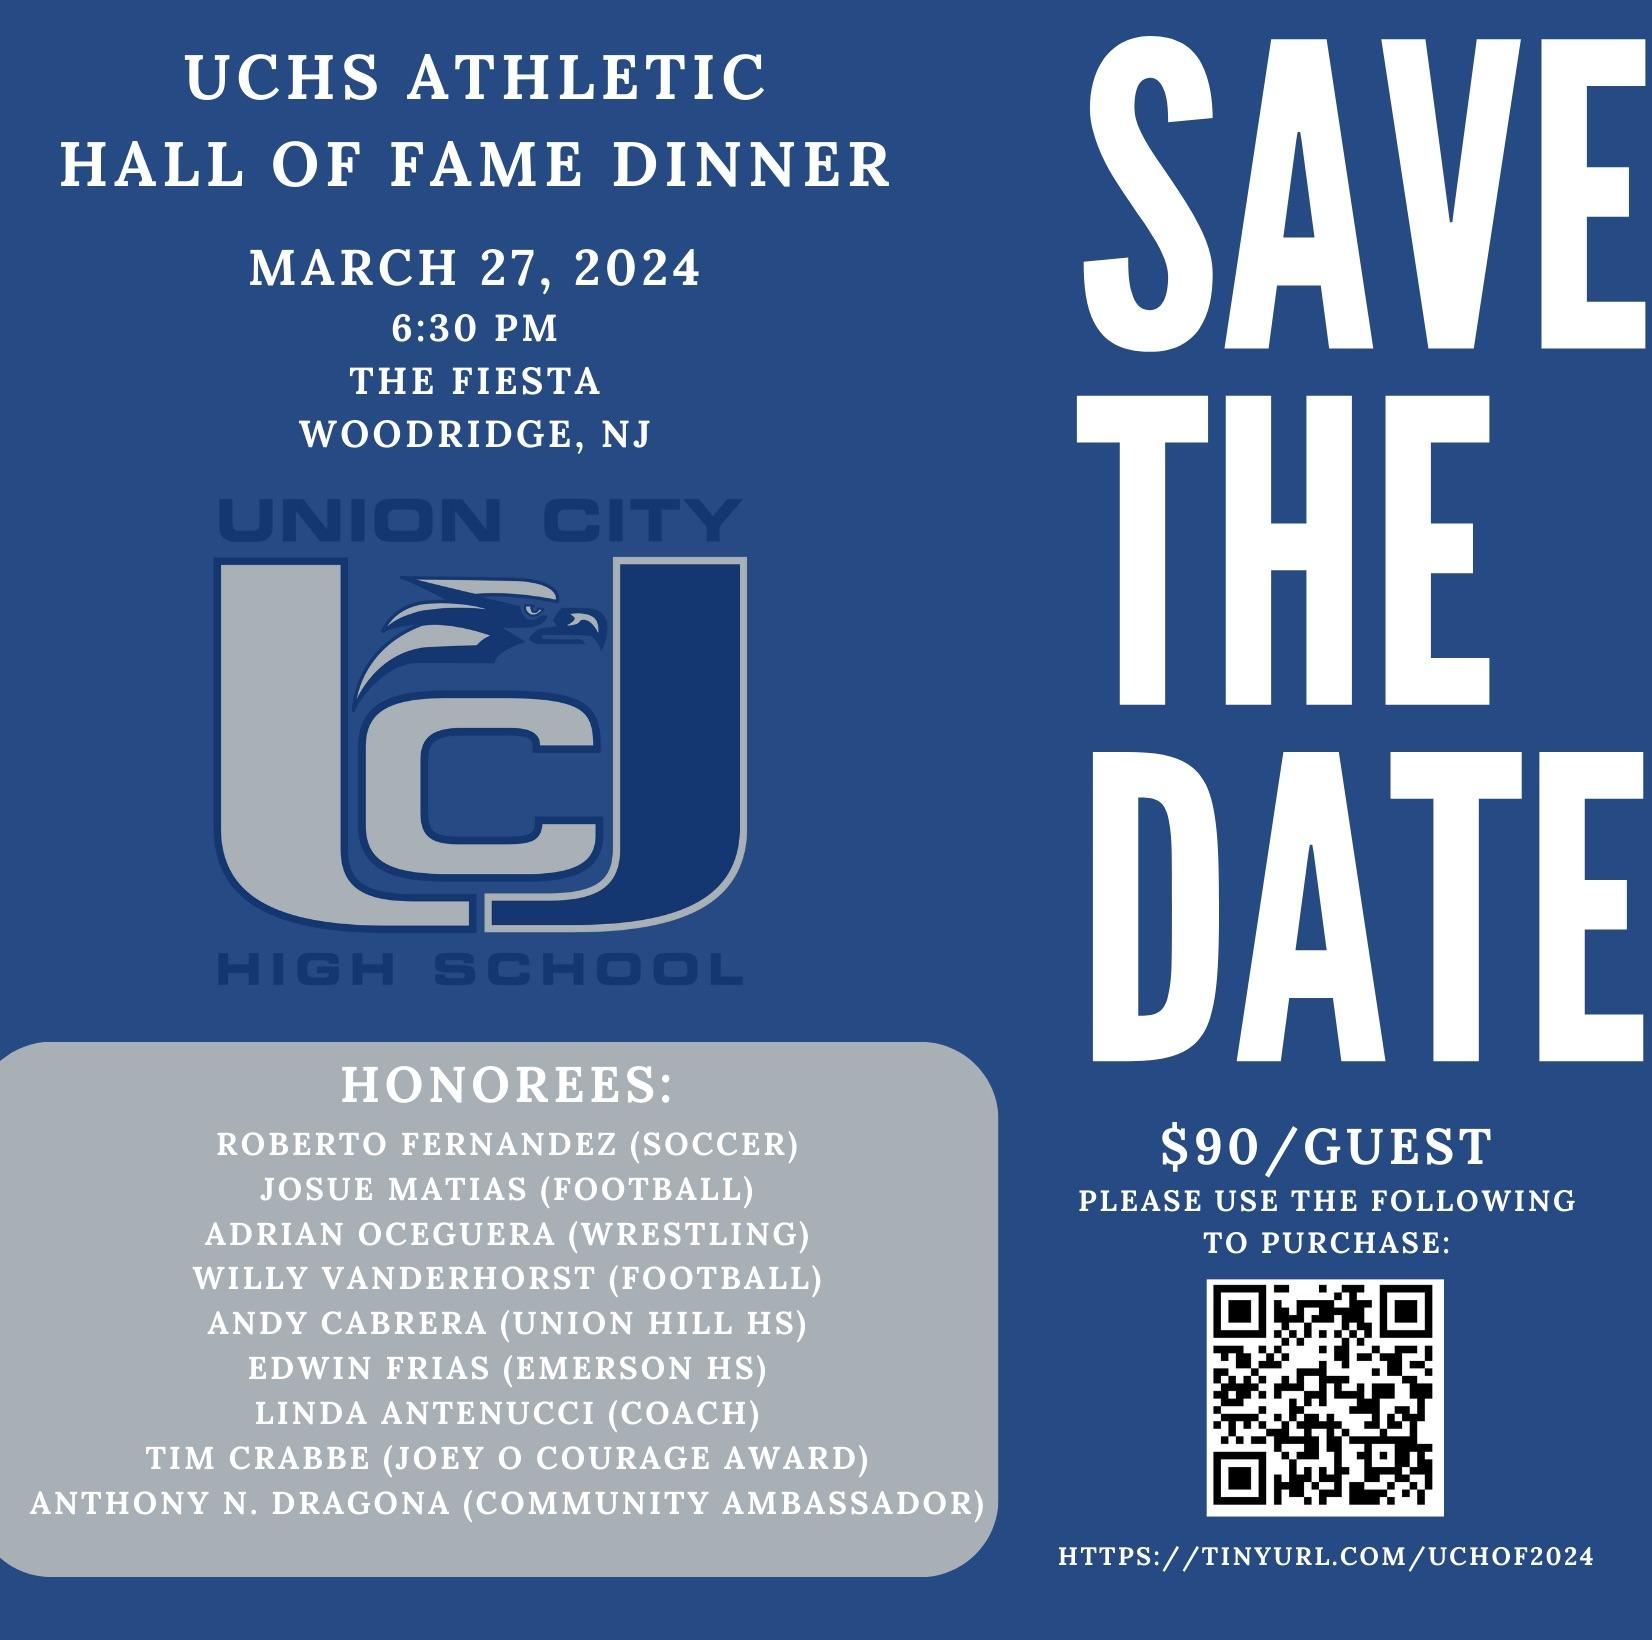 The Union City High School Athletic Hall of Fame Dinner Flyer